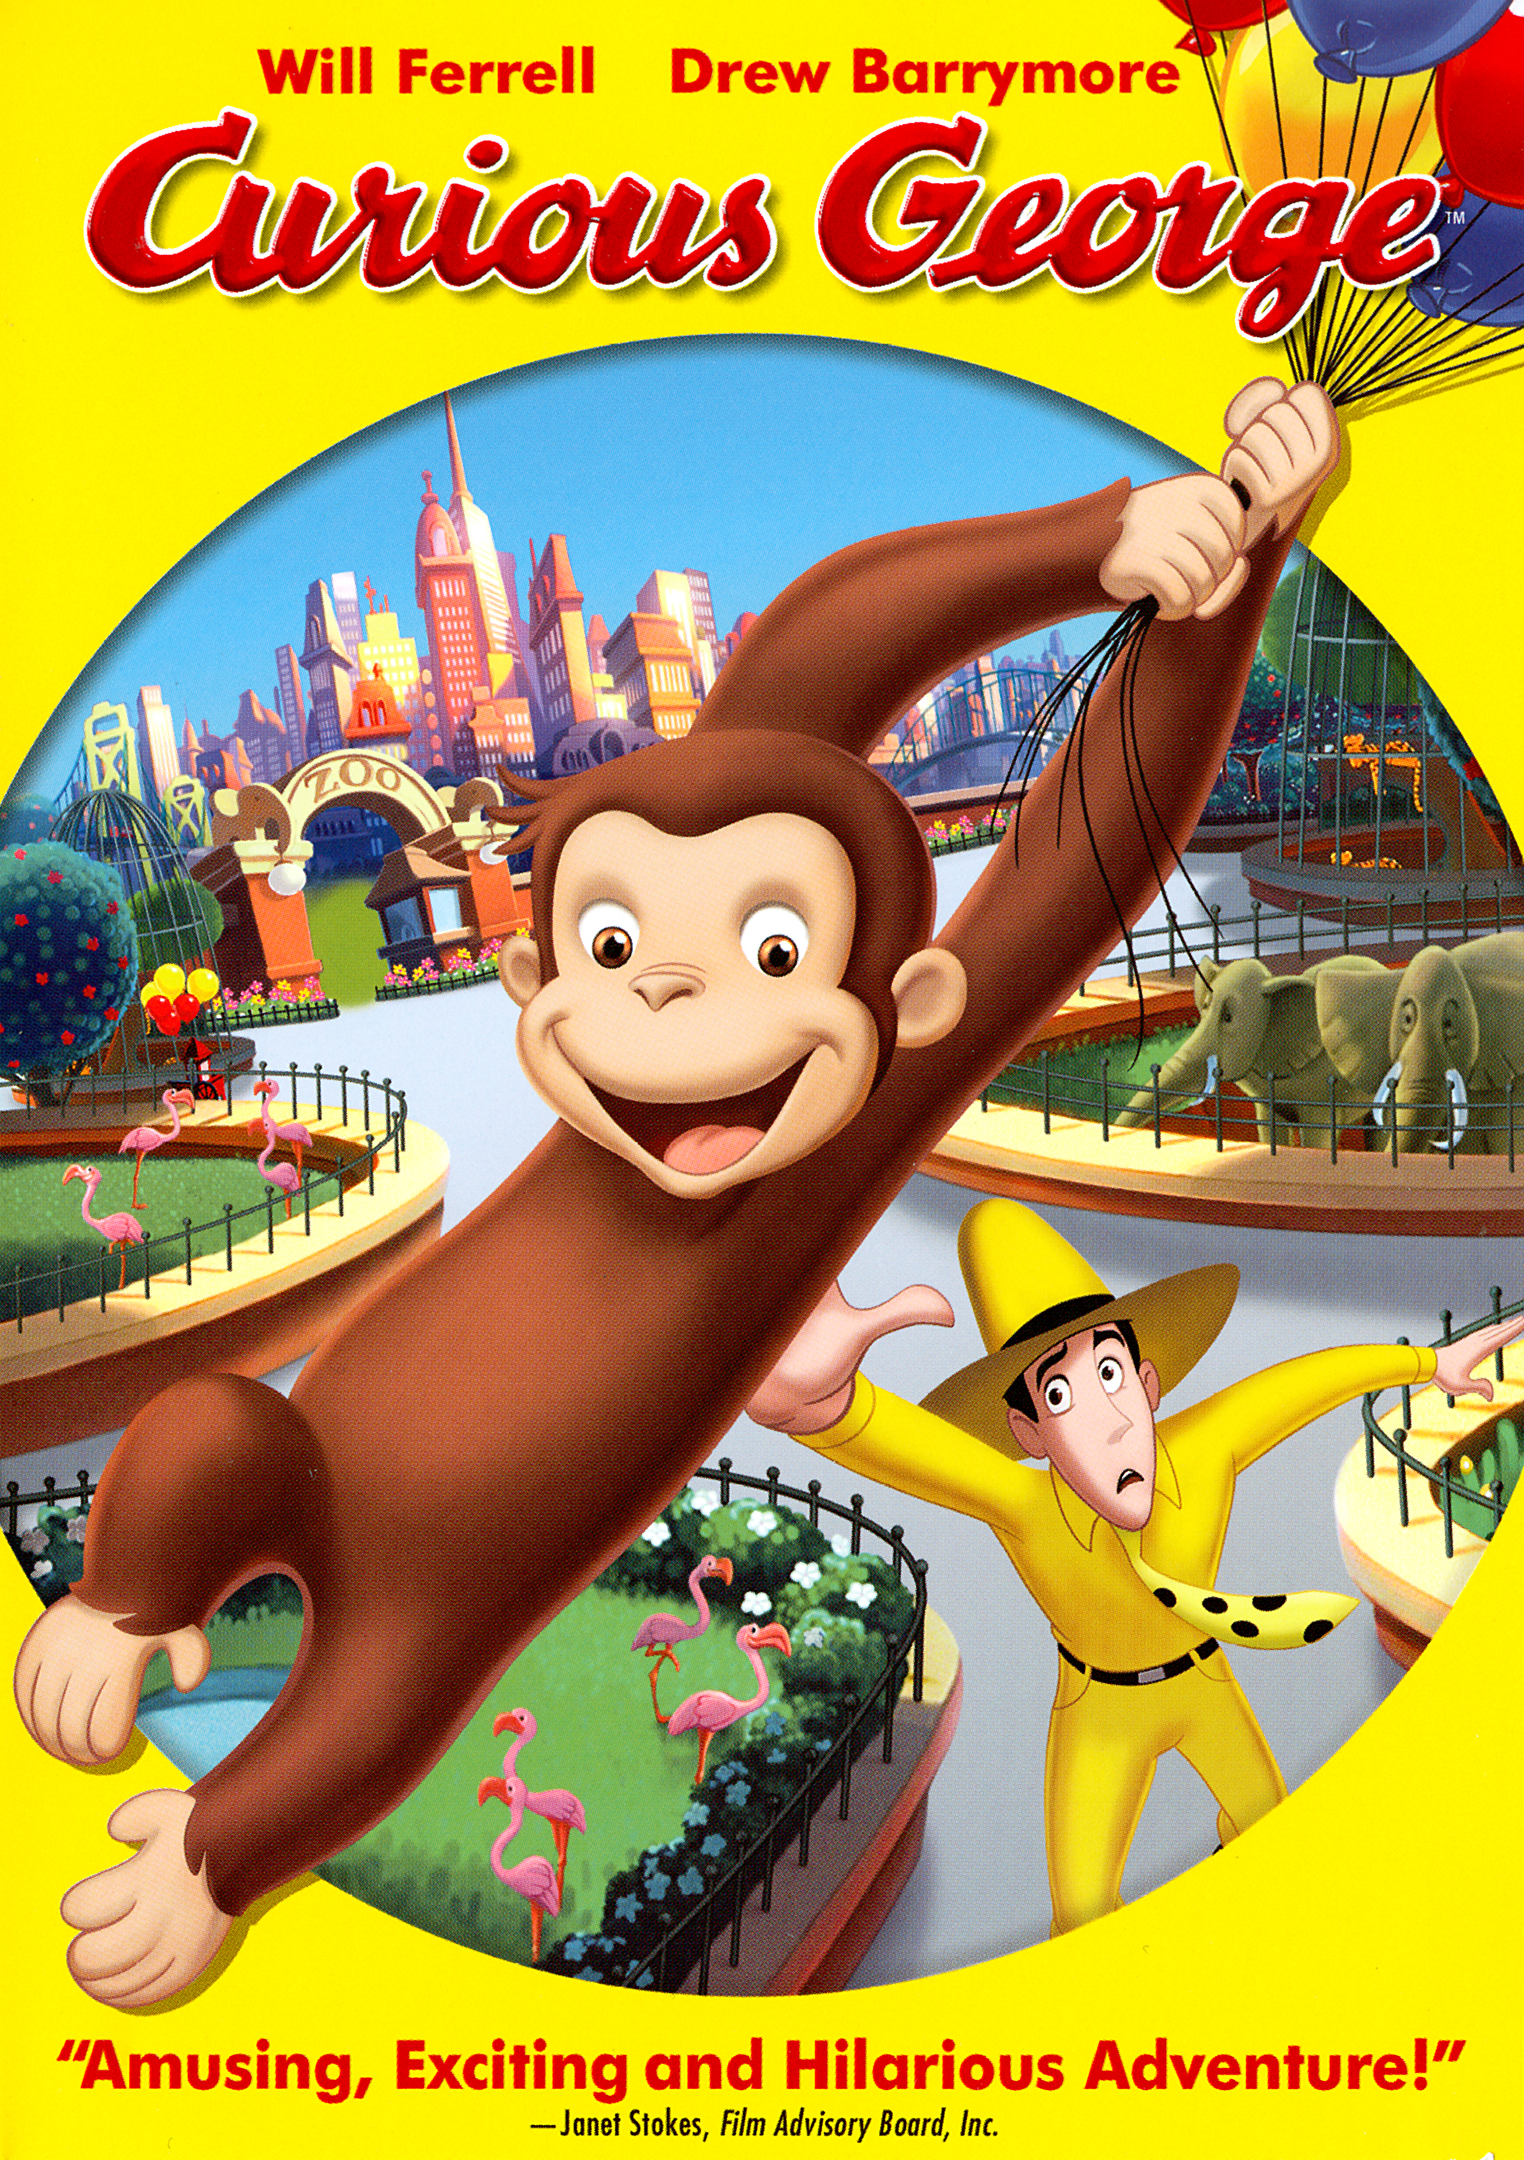 how many curious george episodes in total?